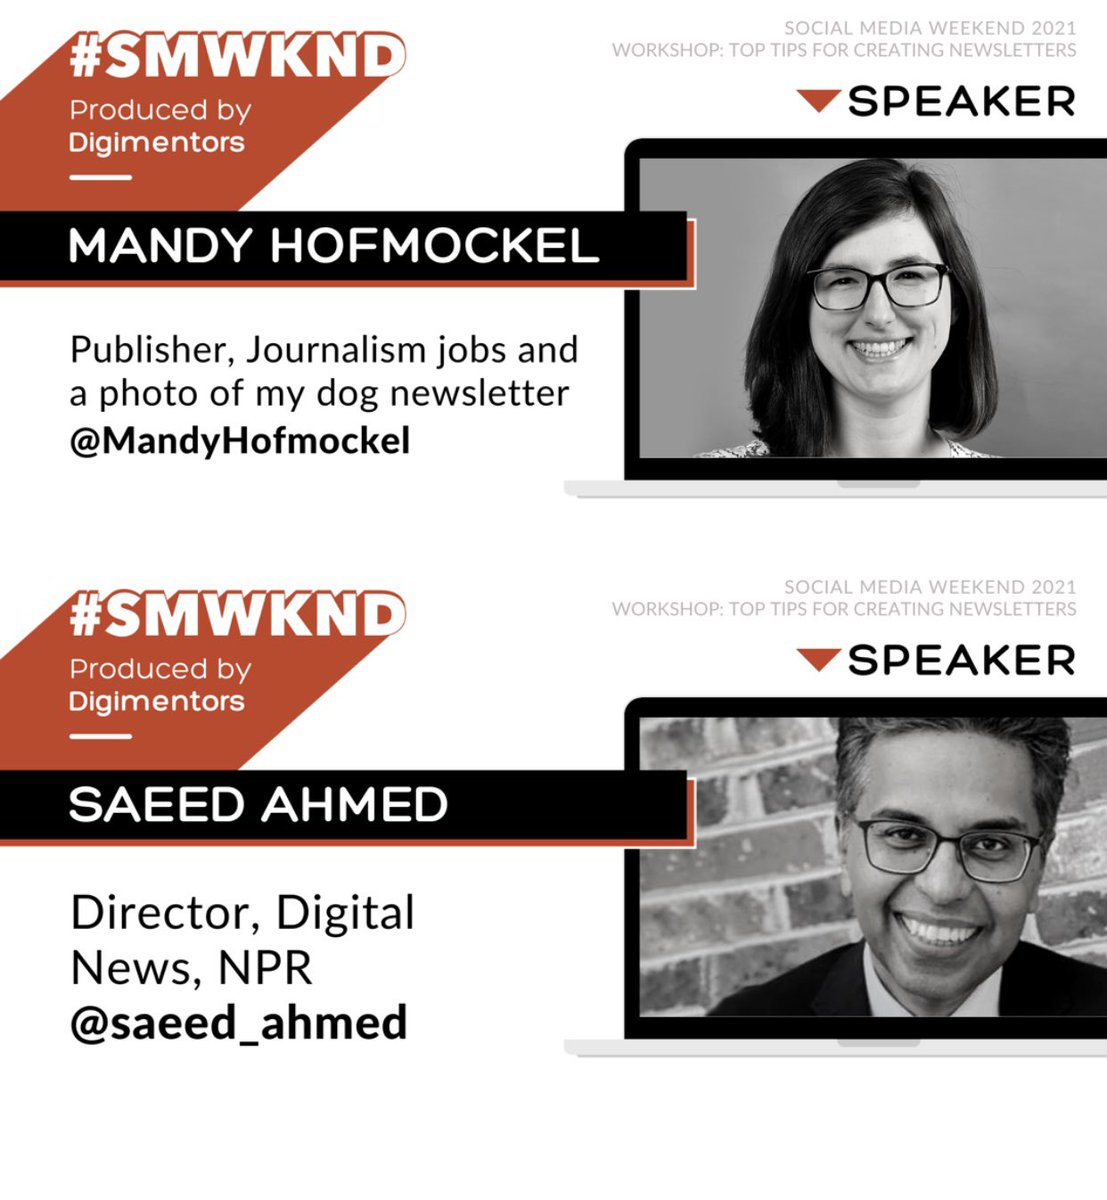 Thinking about starting a newsletter? 

Don’t miss #newsletter experts  @saeed_ahmed Director of Digital News at @Npr and @mandyhofmockel pub of “Journalism Jobs and a Picture of My Dog” at #SMWKND. 

Moderated by @zachprague manager of #SreeNote 

Tix: smwknd.com